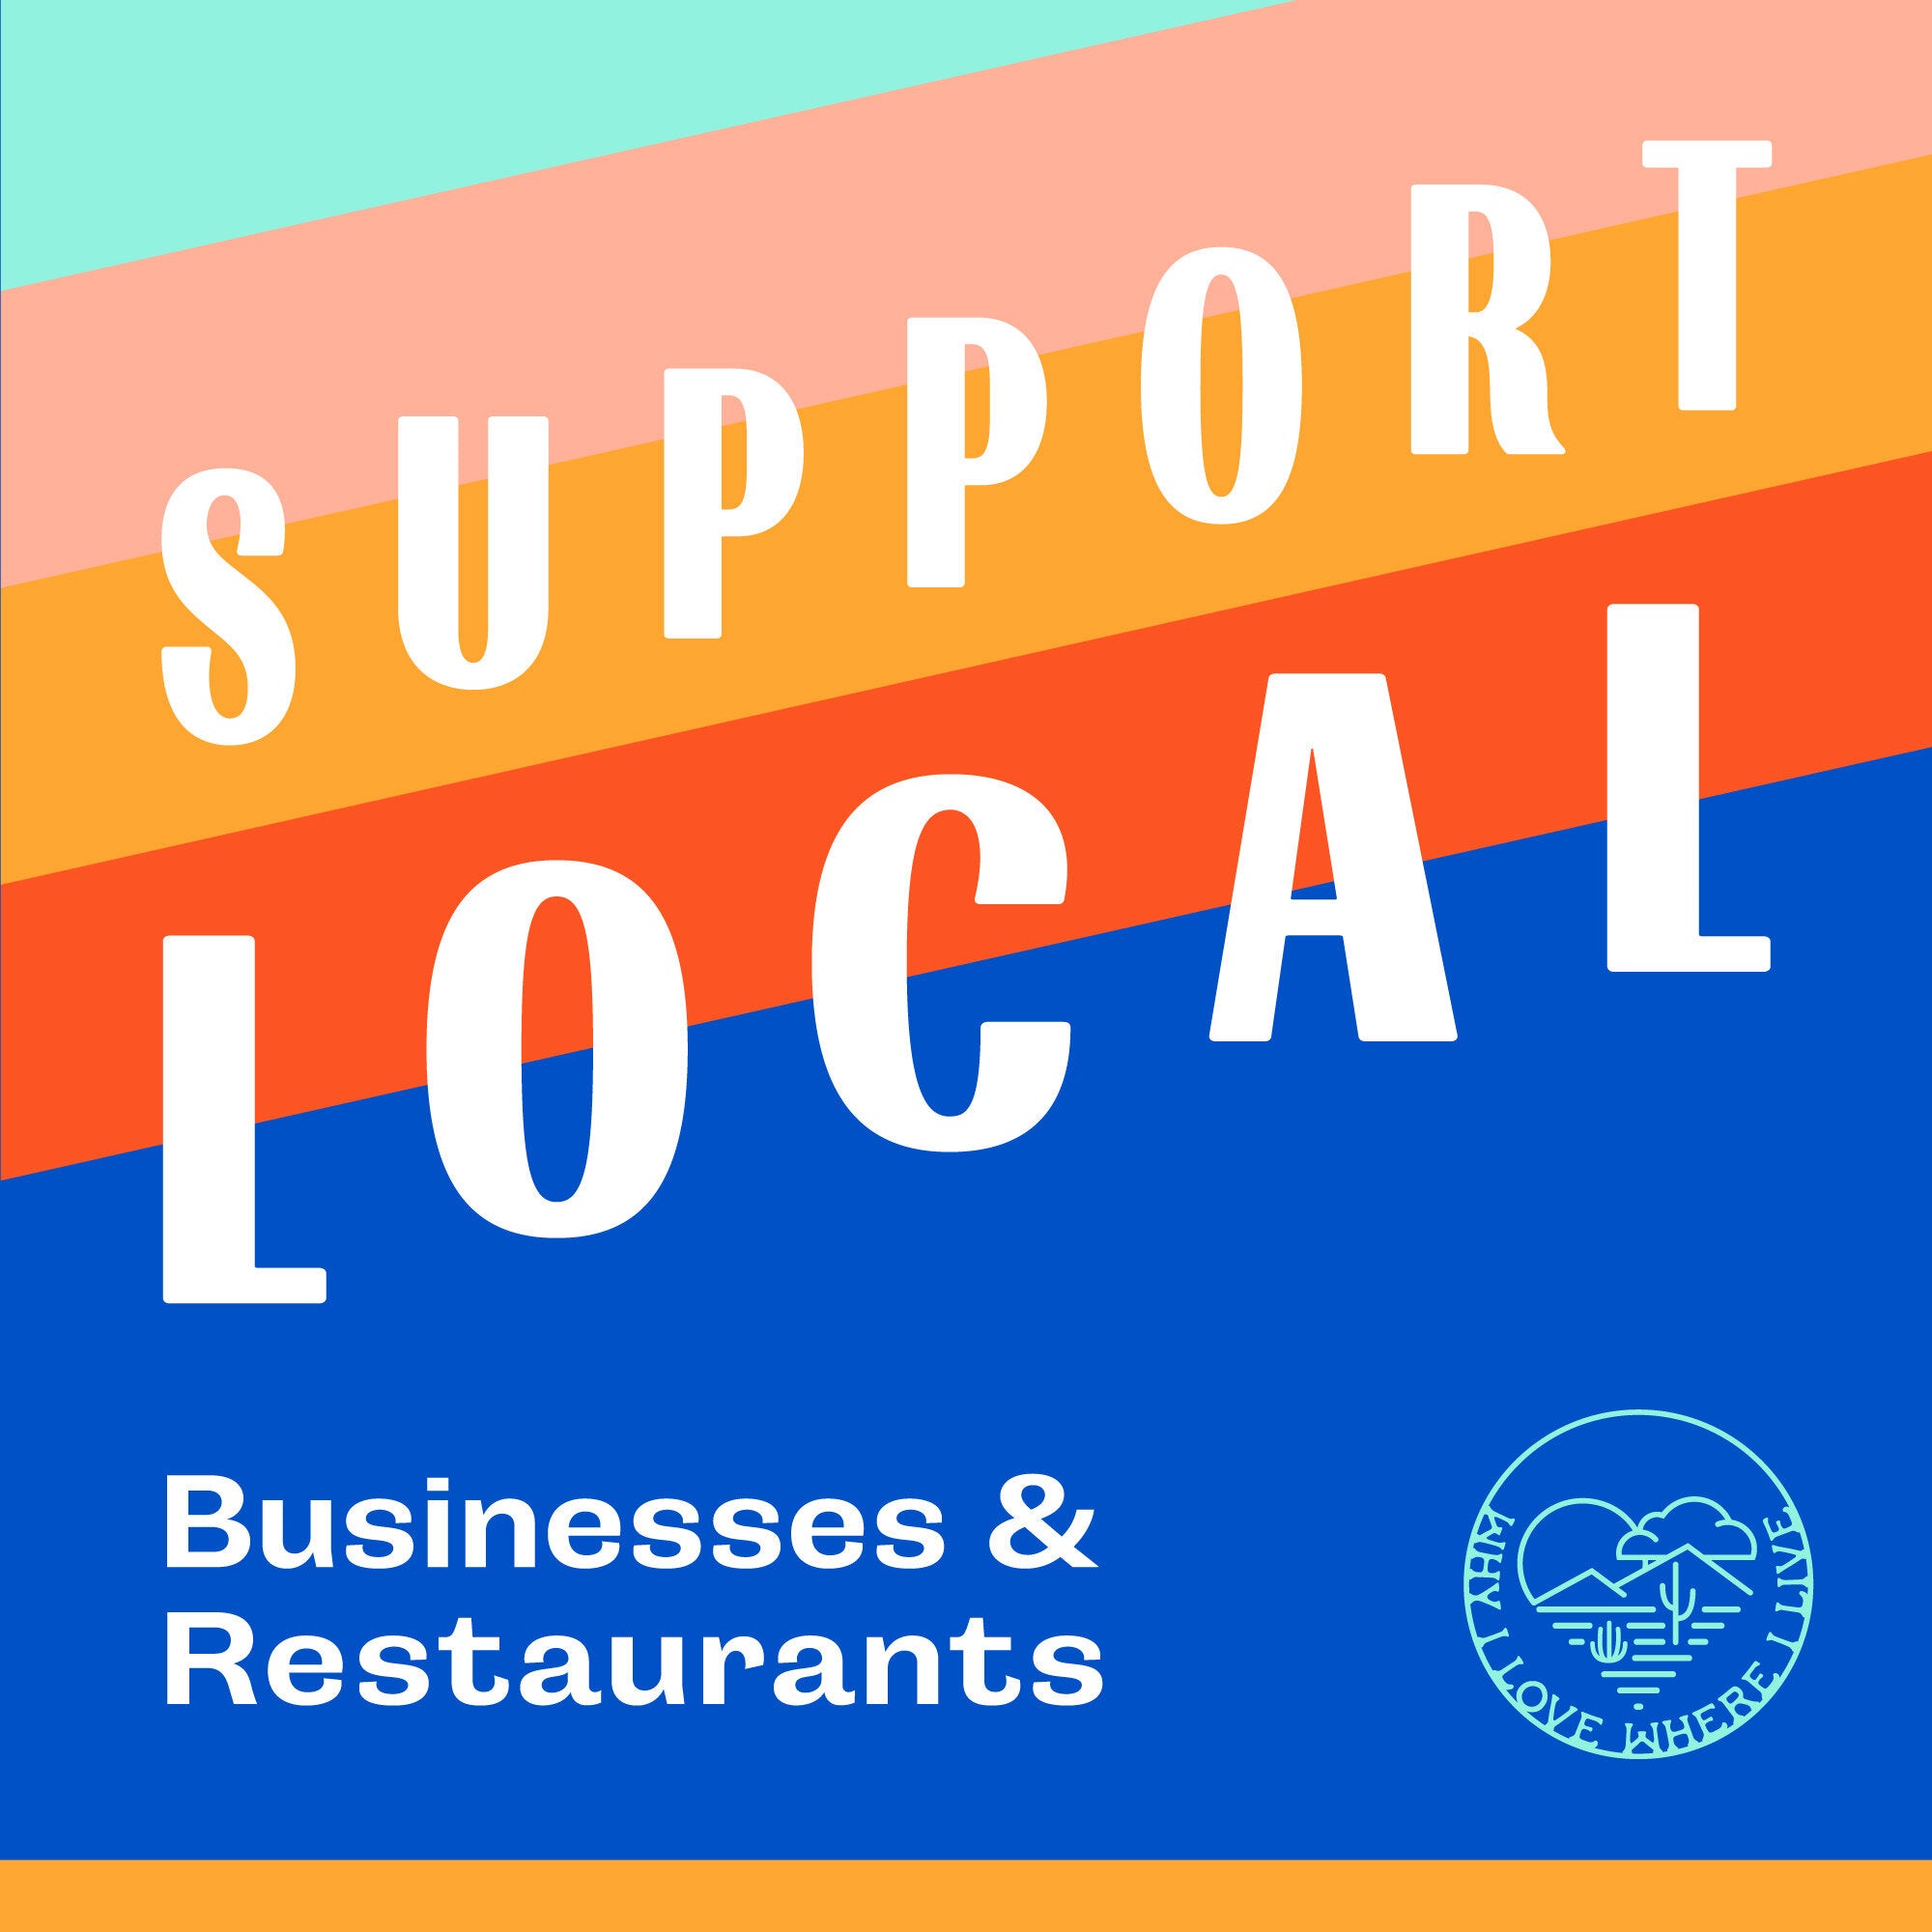 Supporting Local Businesses & Restaurants Through COVID-19